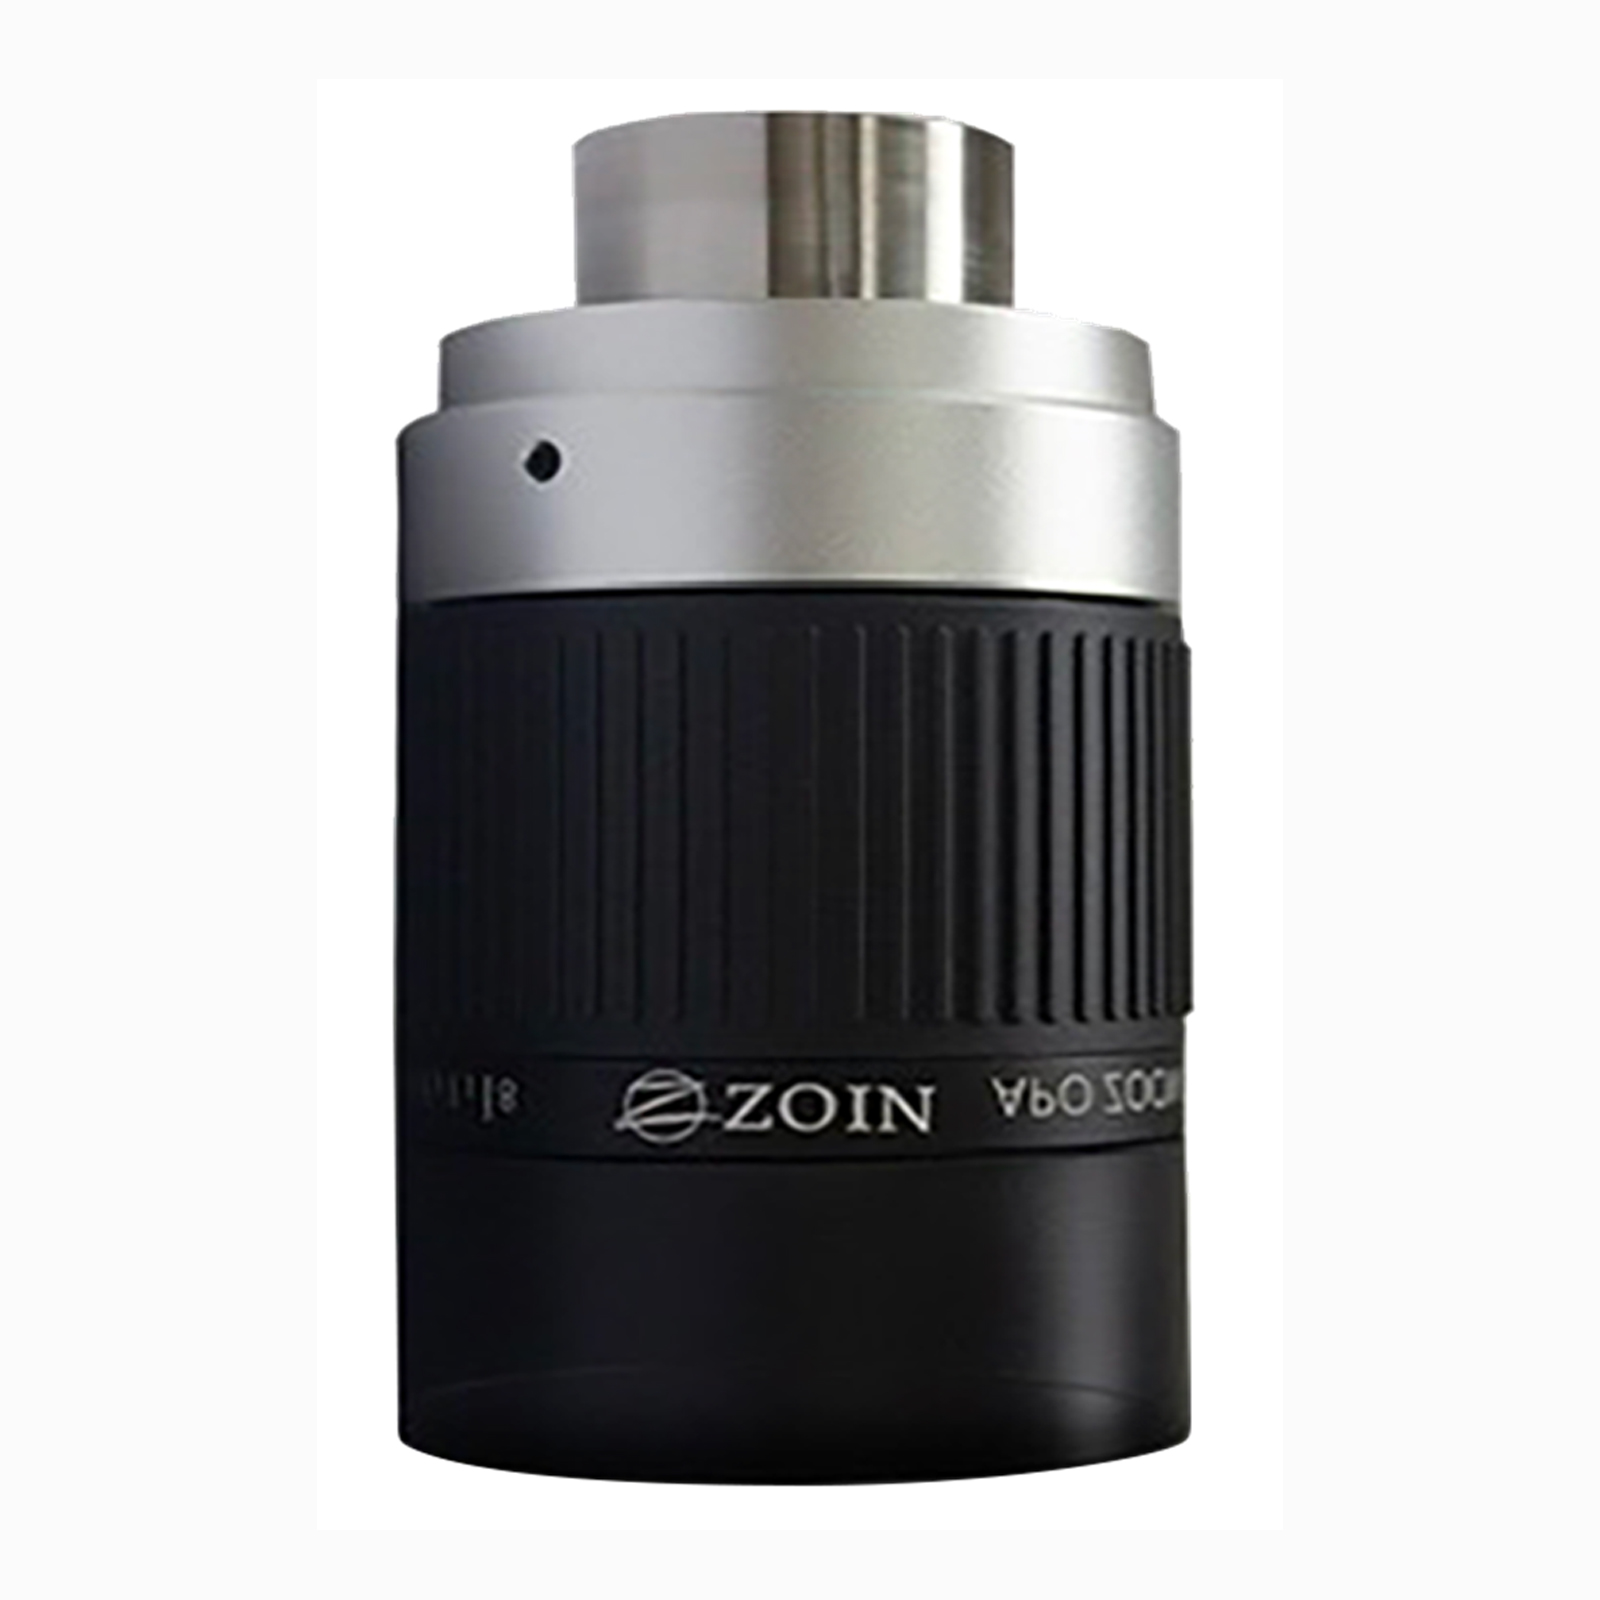 Zoom eyepiece: 8-20mm planar APO zoom eyepiece, performance multiplier imaging, clear astronomical viewing